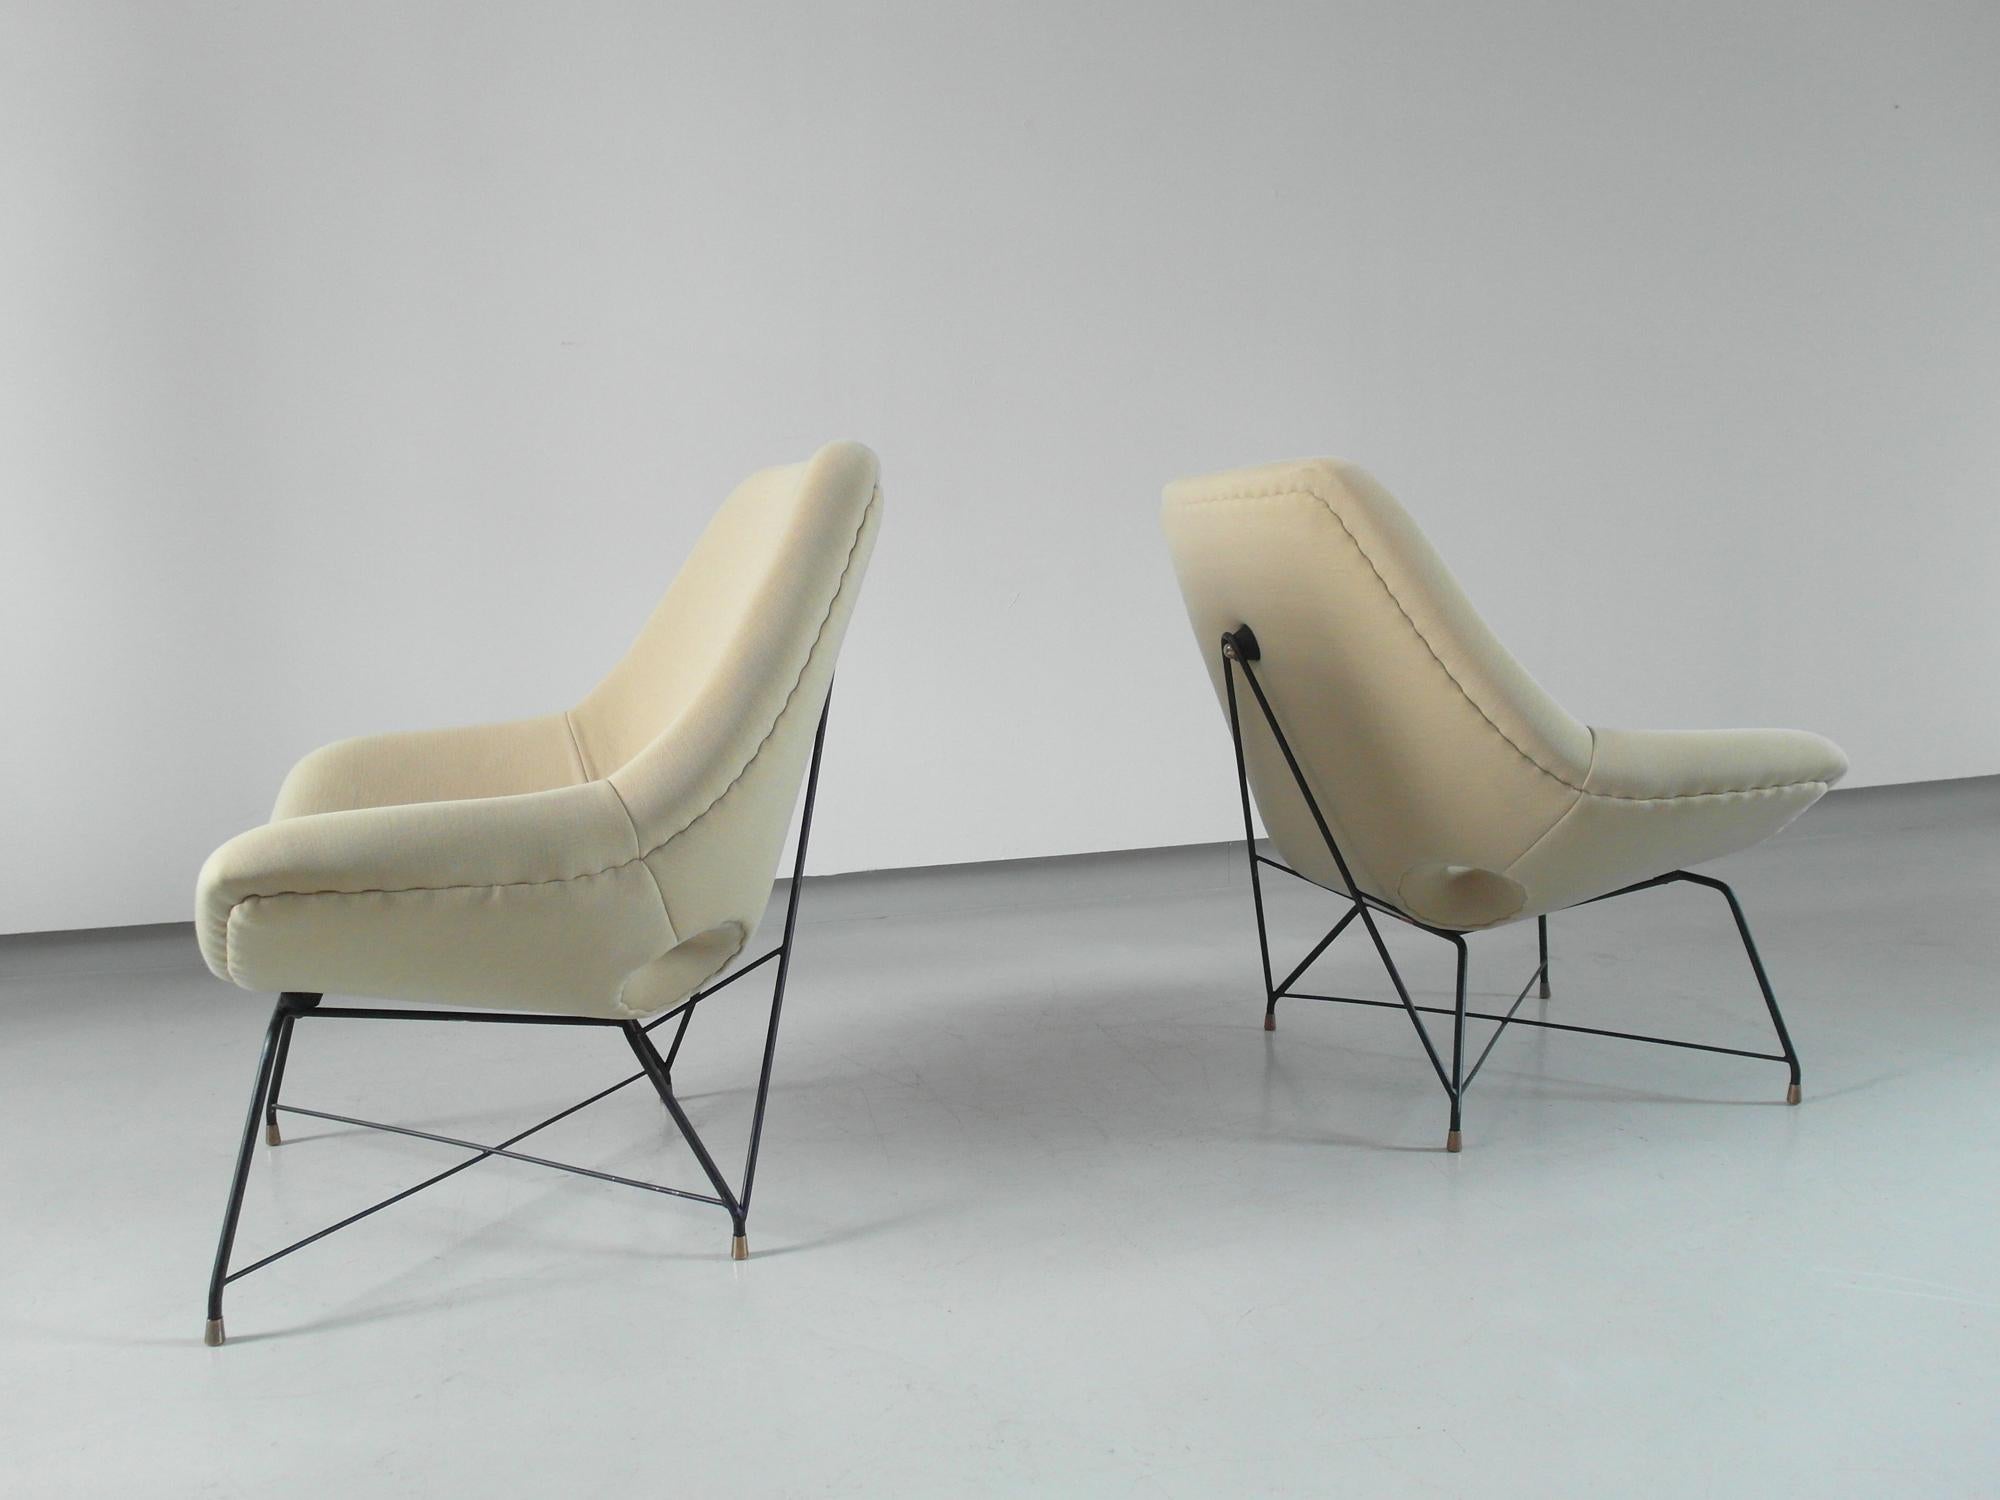 Metal Sculptural Pair of Lounge Chairs by Augusto Bozzi for Saporiti, Italy, 1954 For Sale